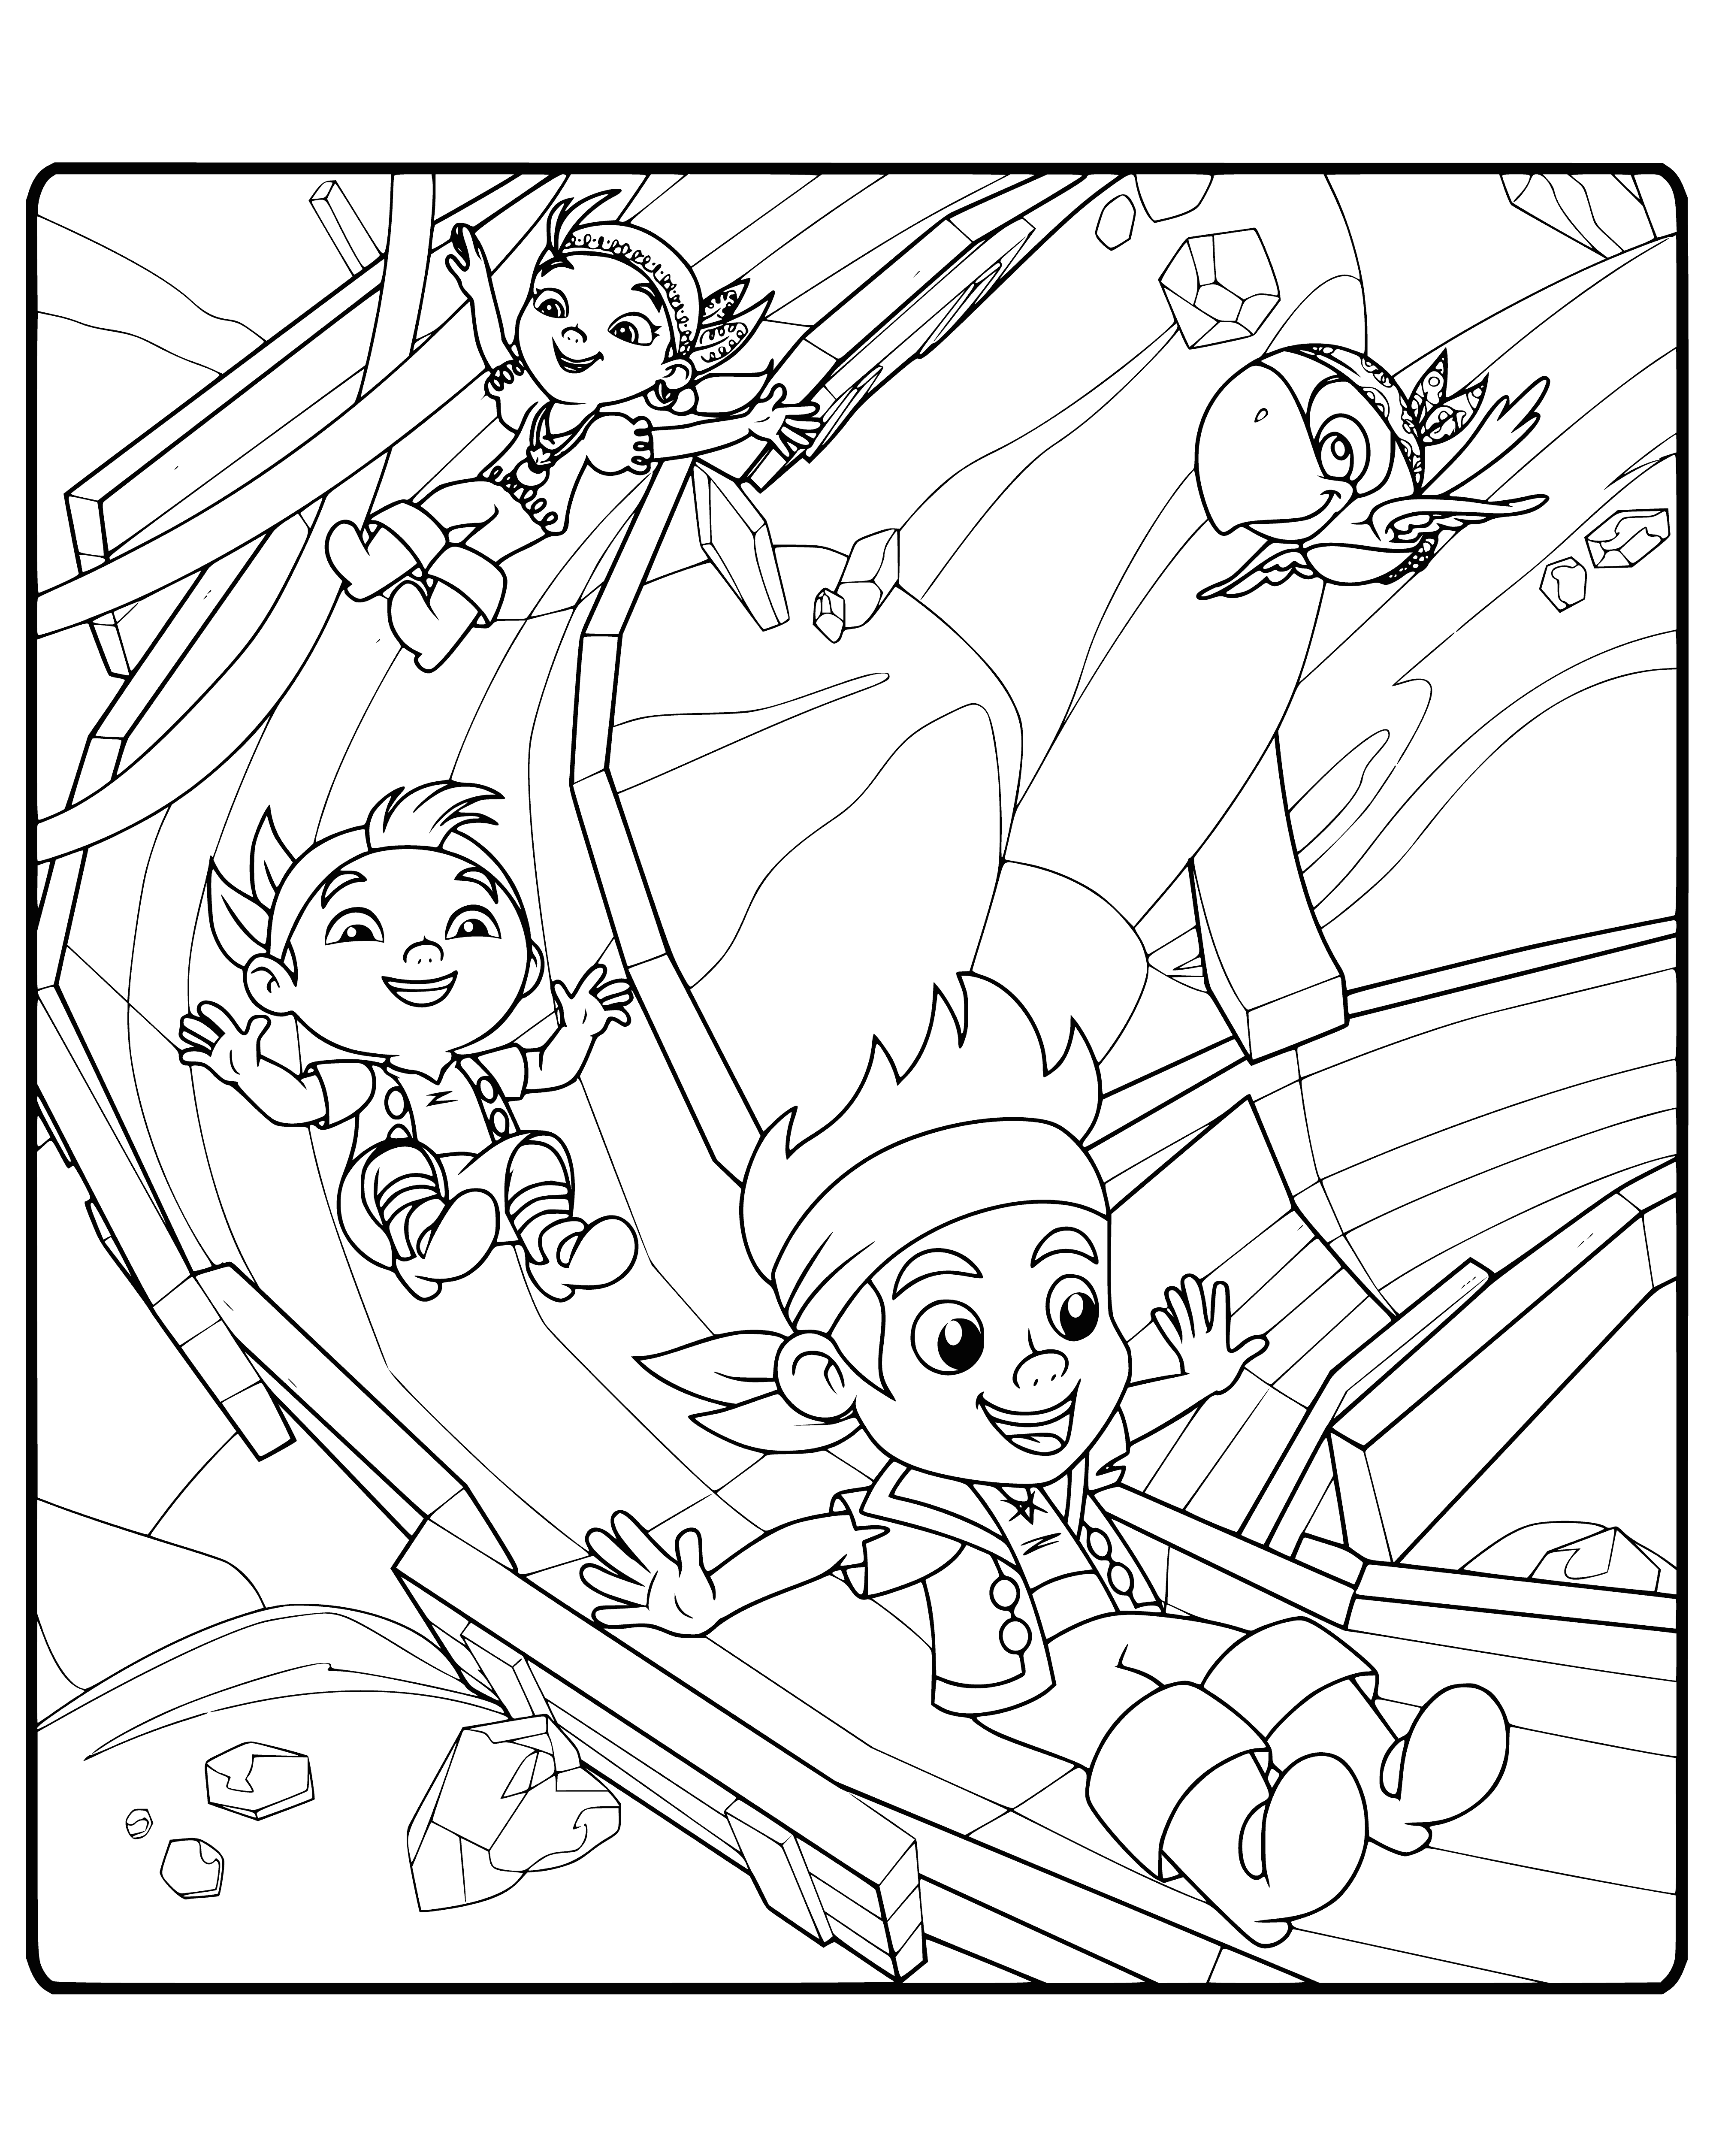 Jake, Cubby and Izzy are rolling down coloring page